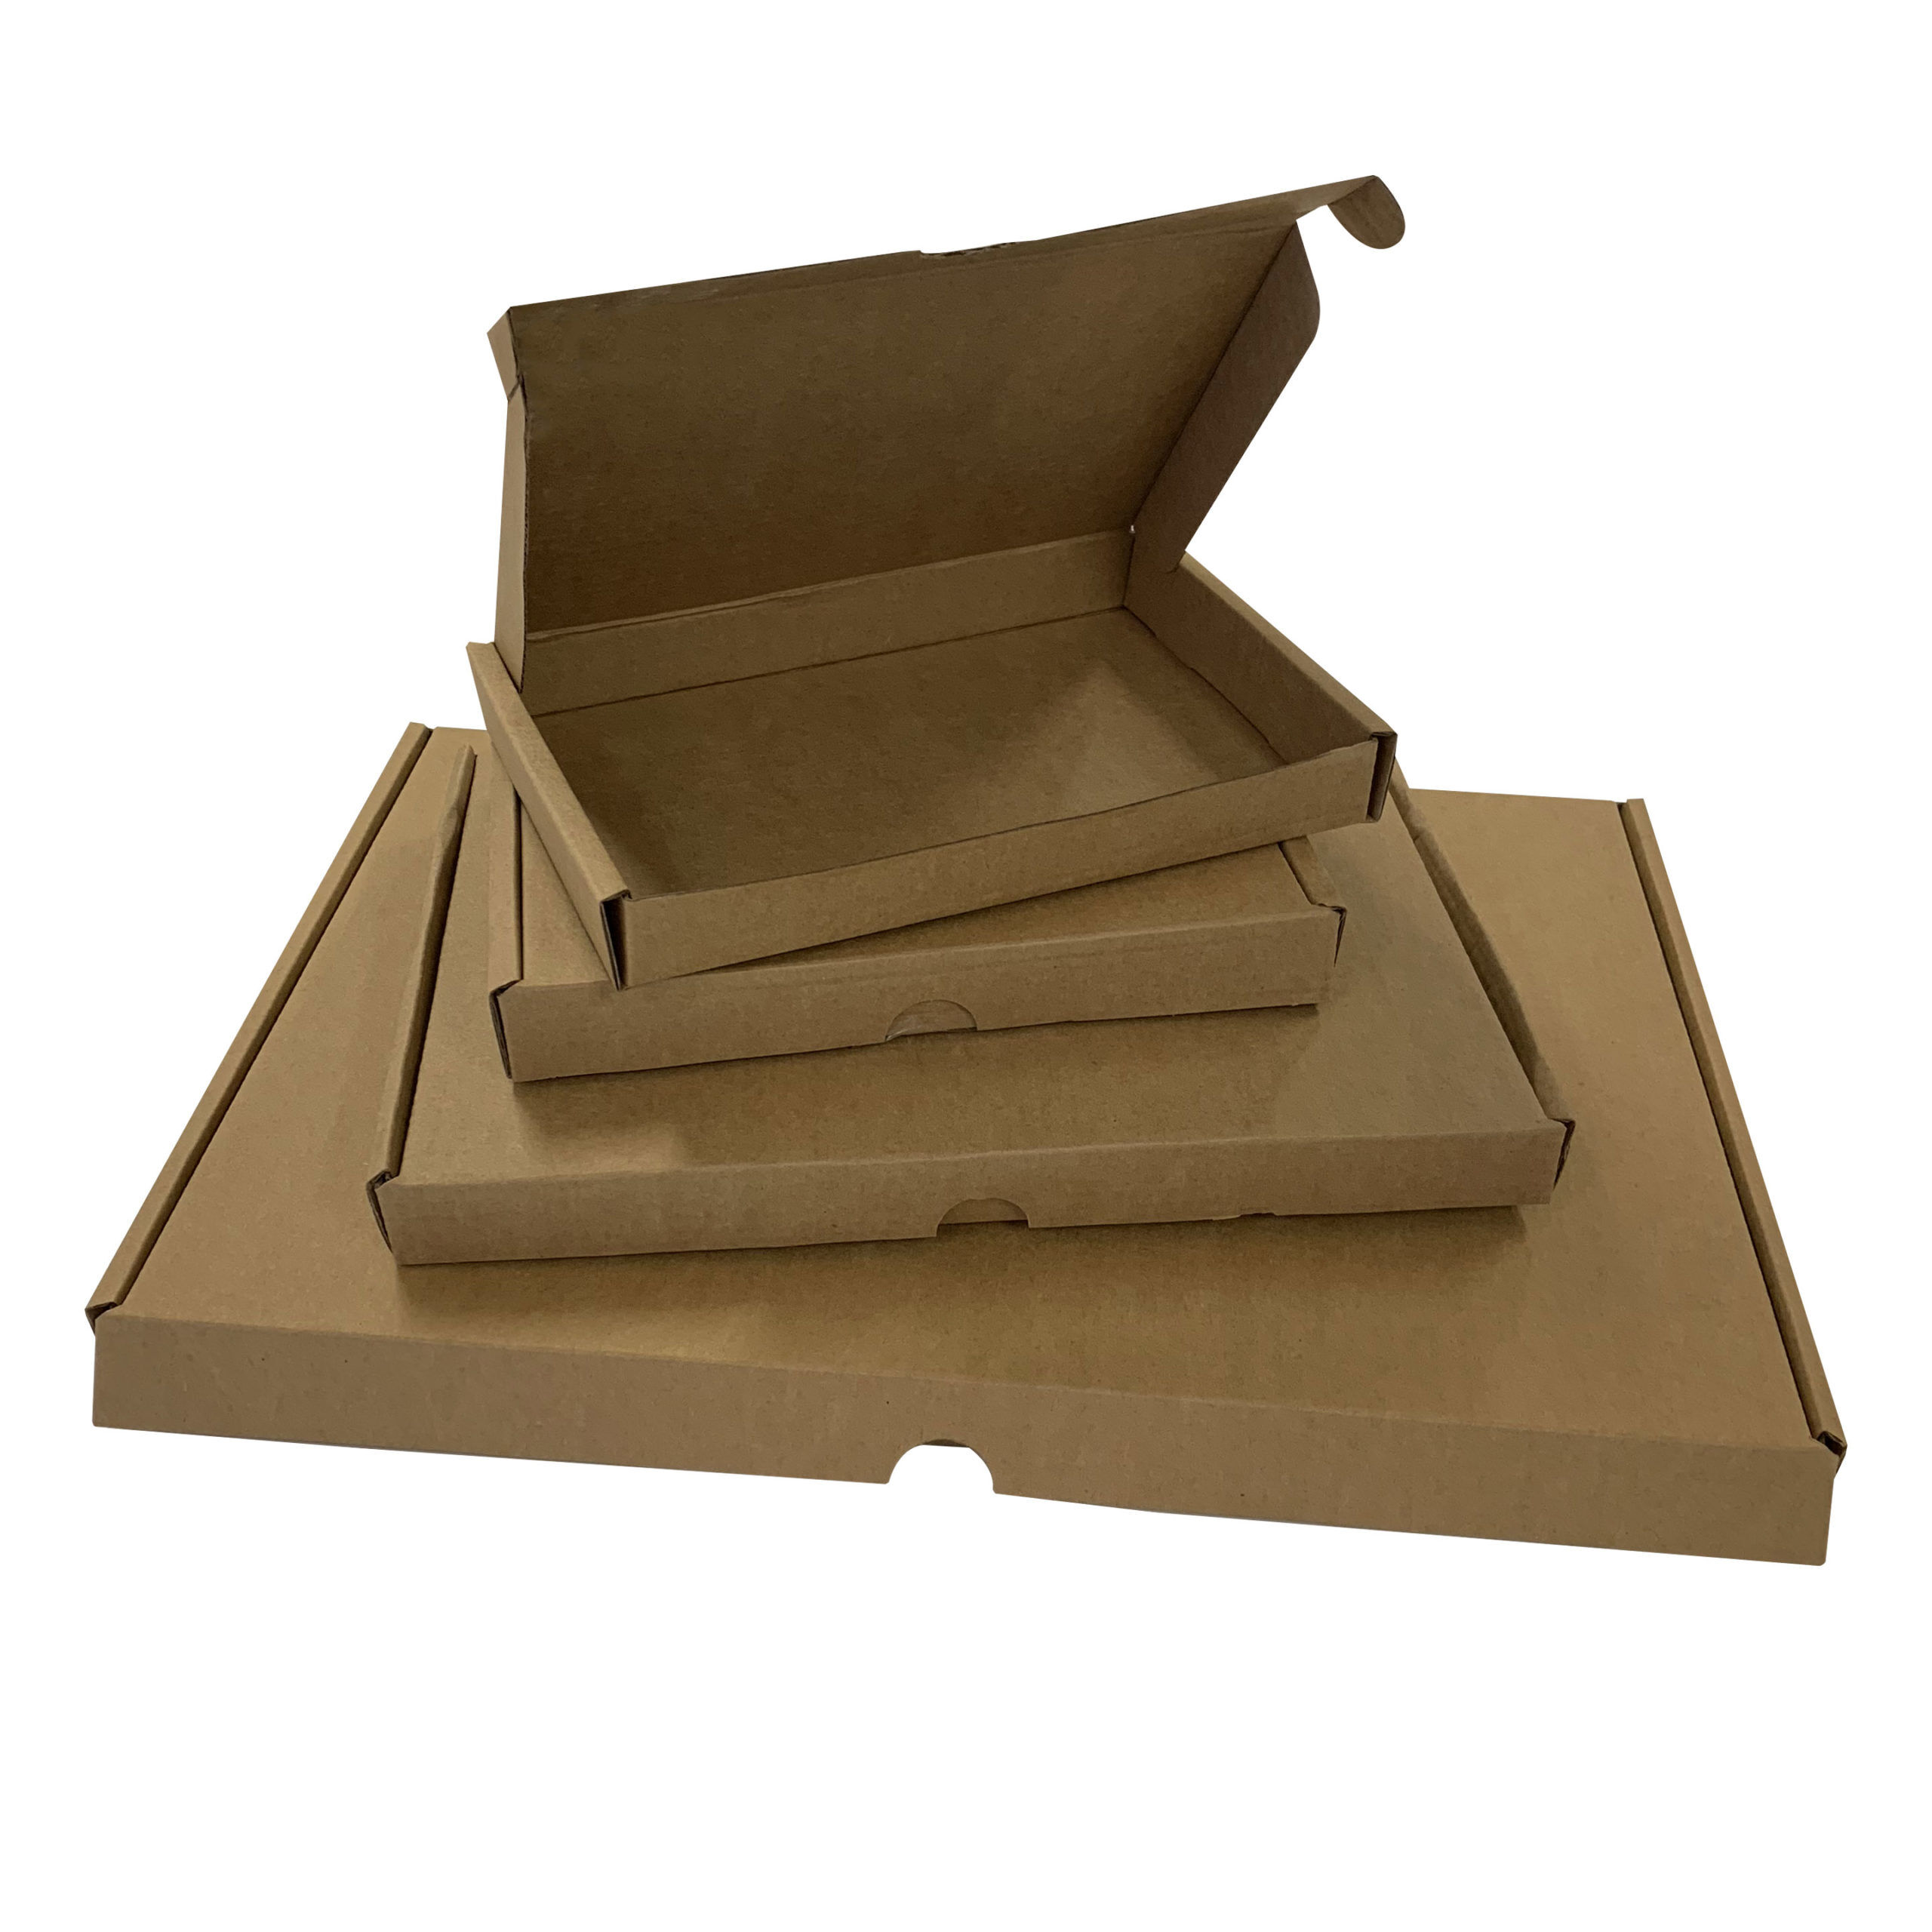 200 x CARDBOARD POSTAL BOXES SIZE C4 A4 ROYAL MAIL LARGE LETTER STRONG BOX 